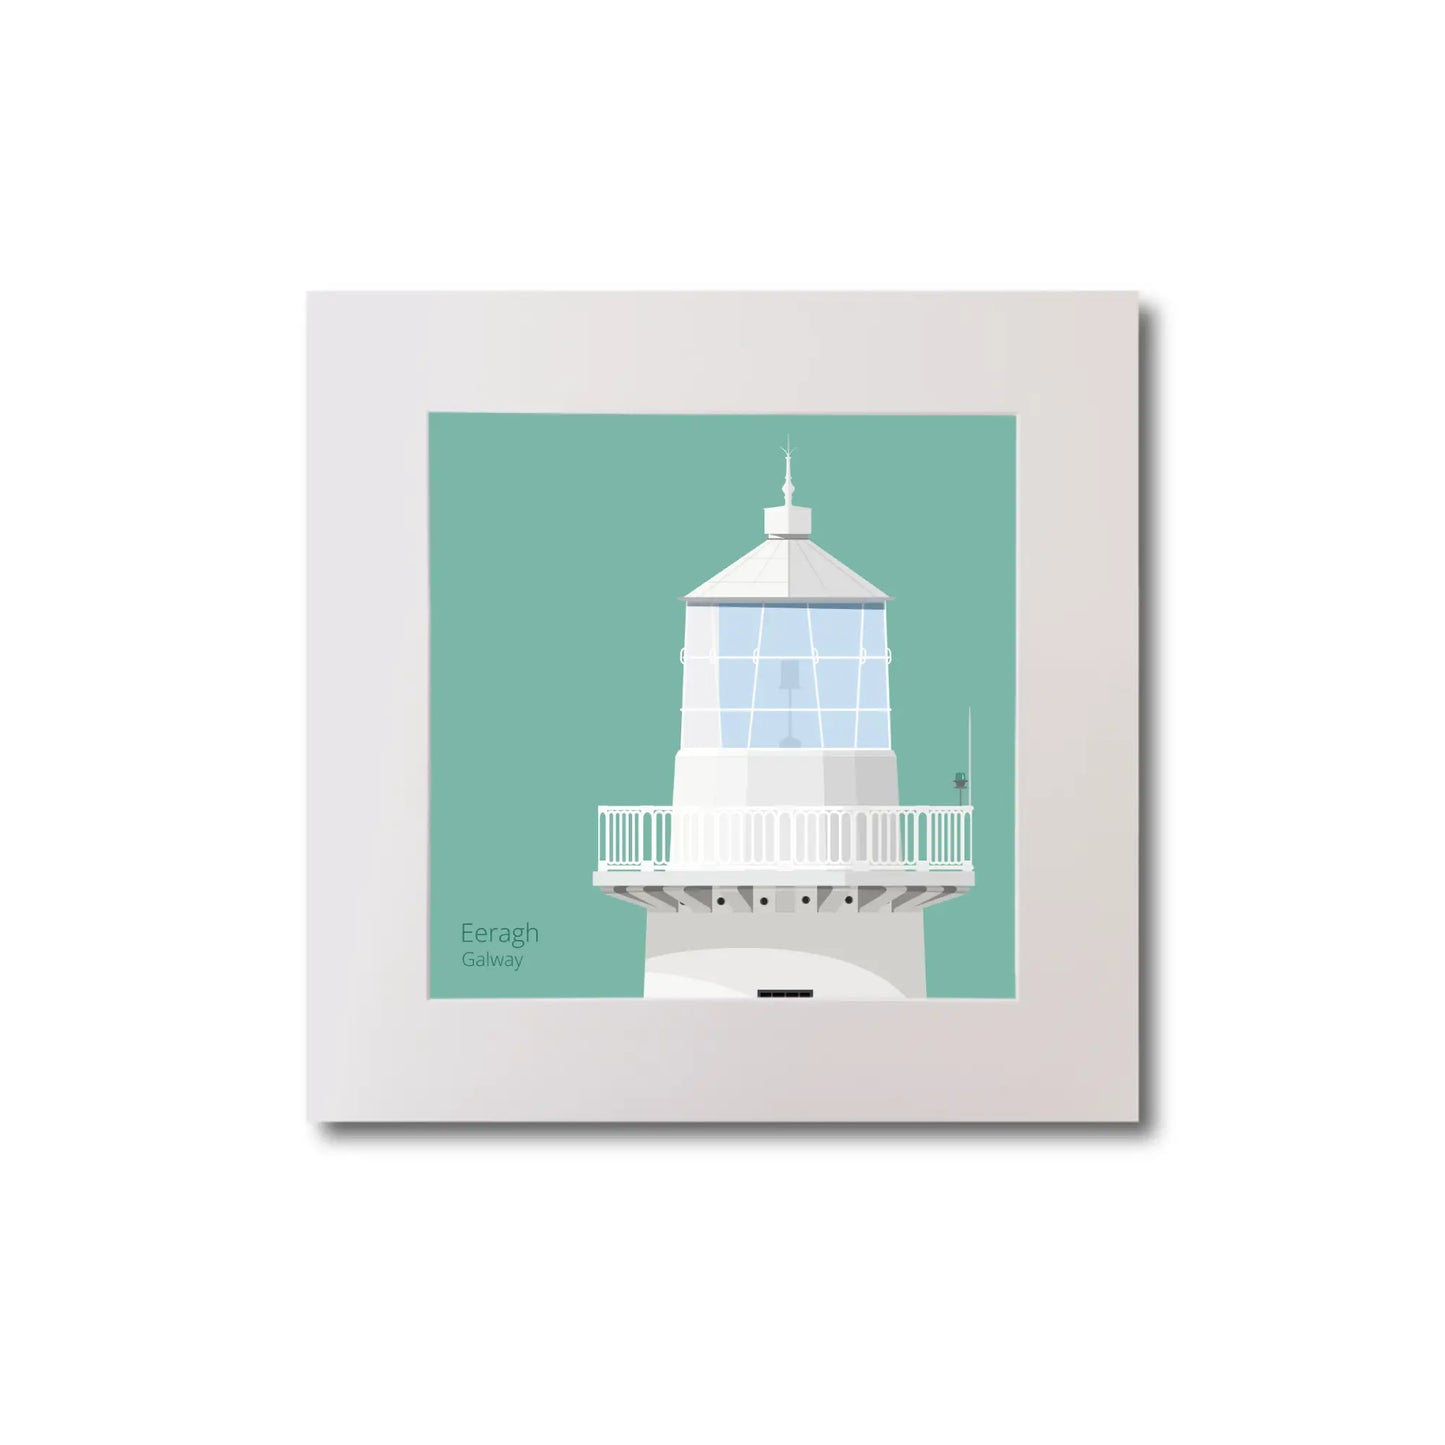 Illustration Eeragh lighthouse on an ocean green background, mounted and measuring 20x20cm.